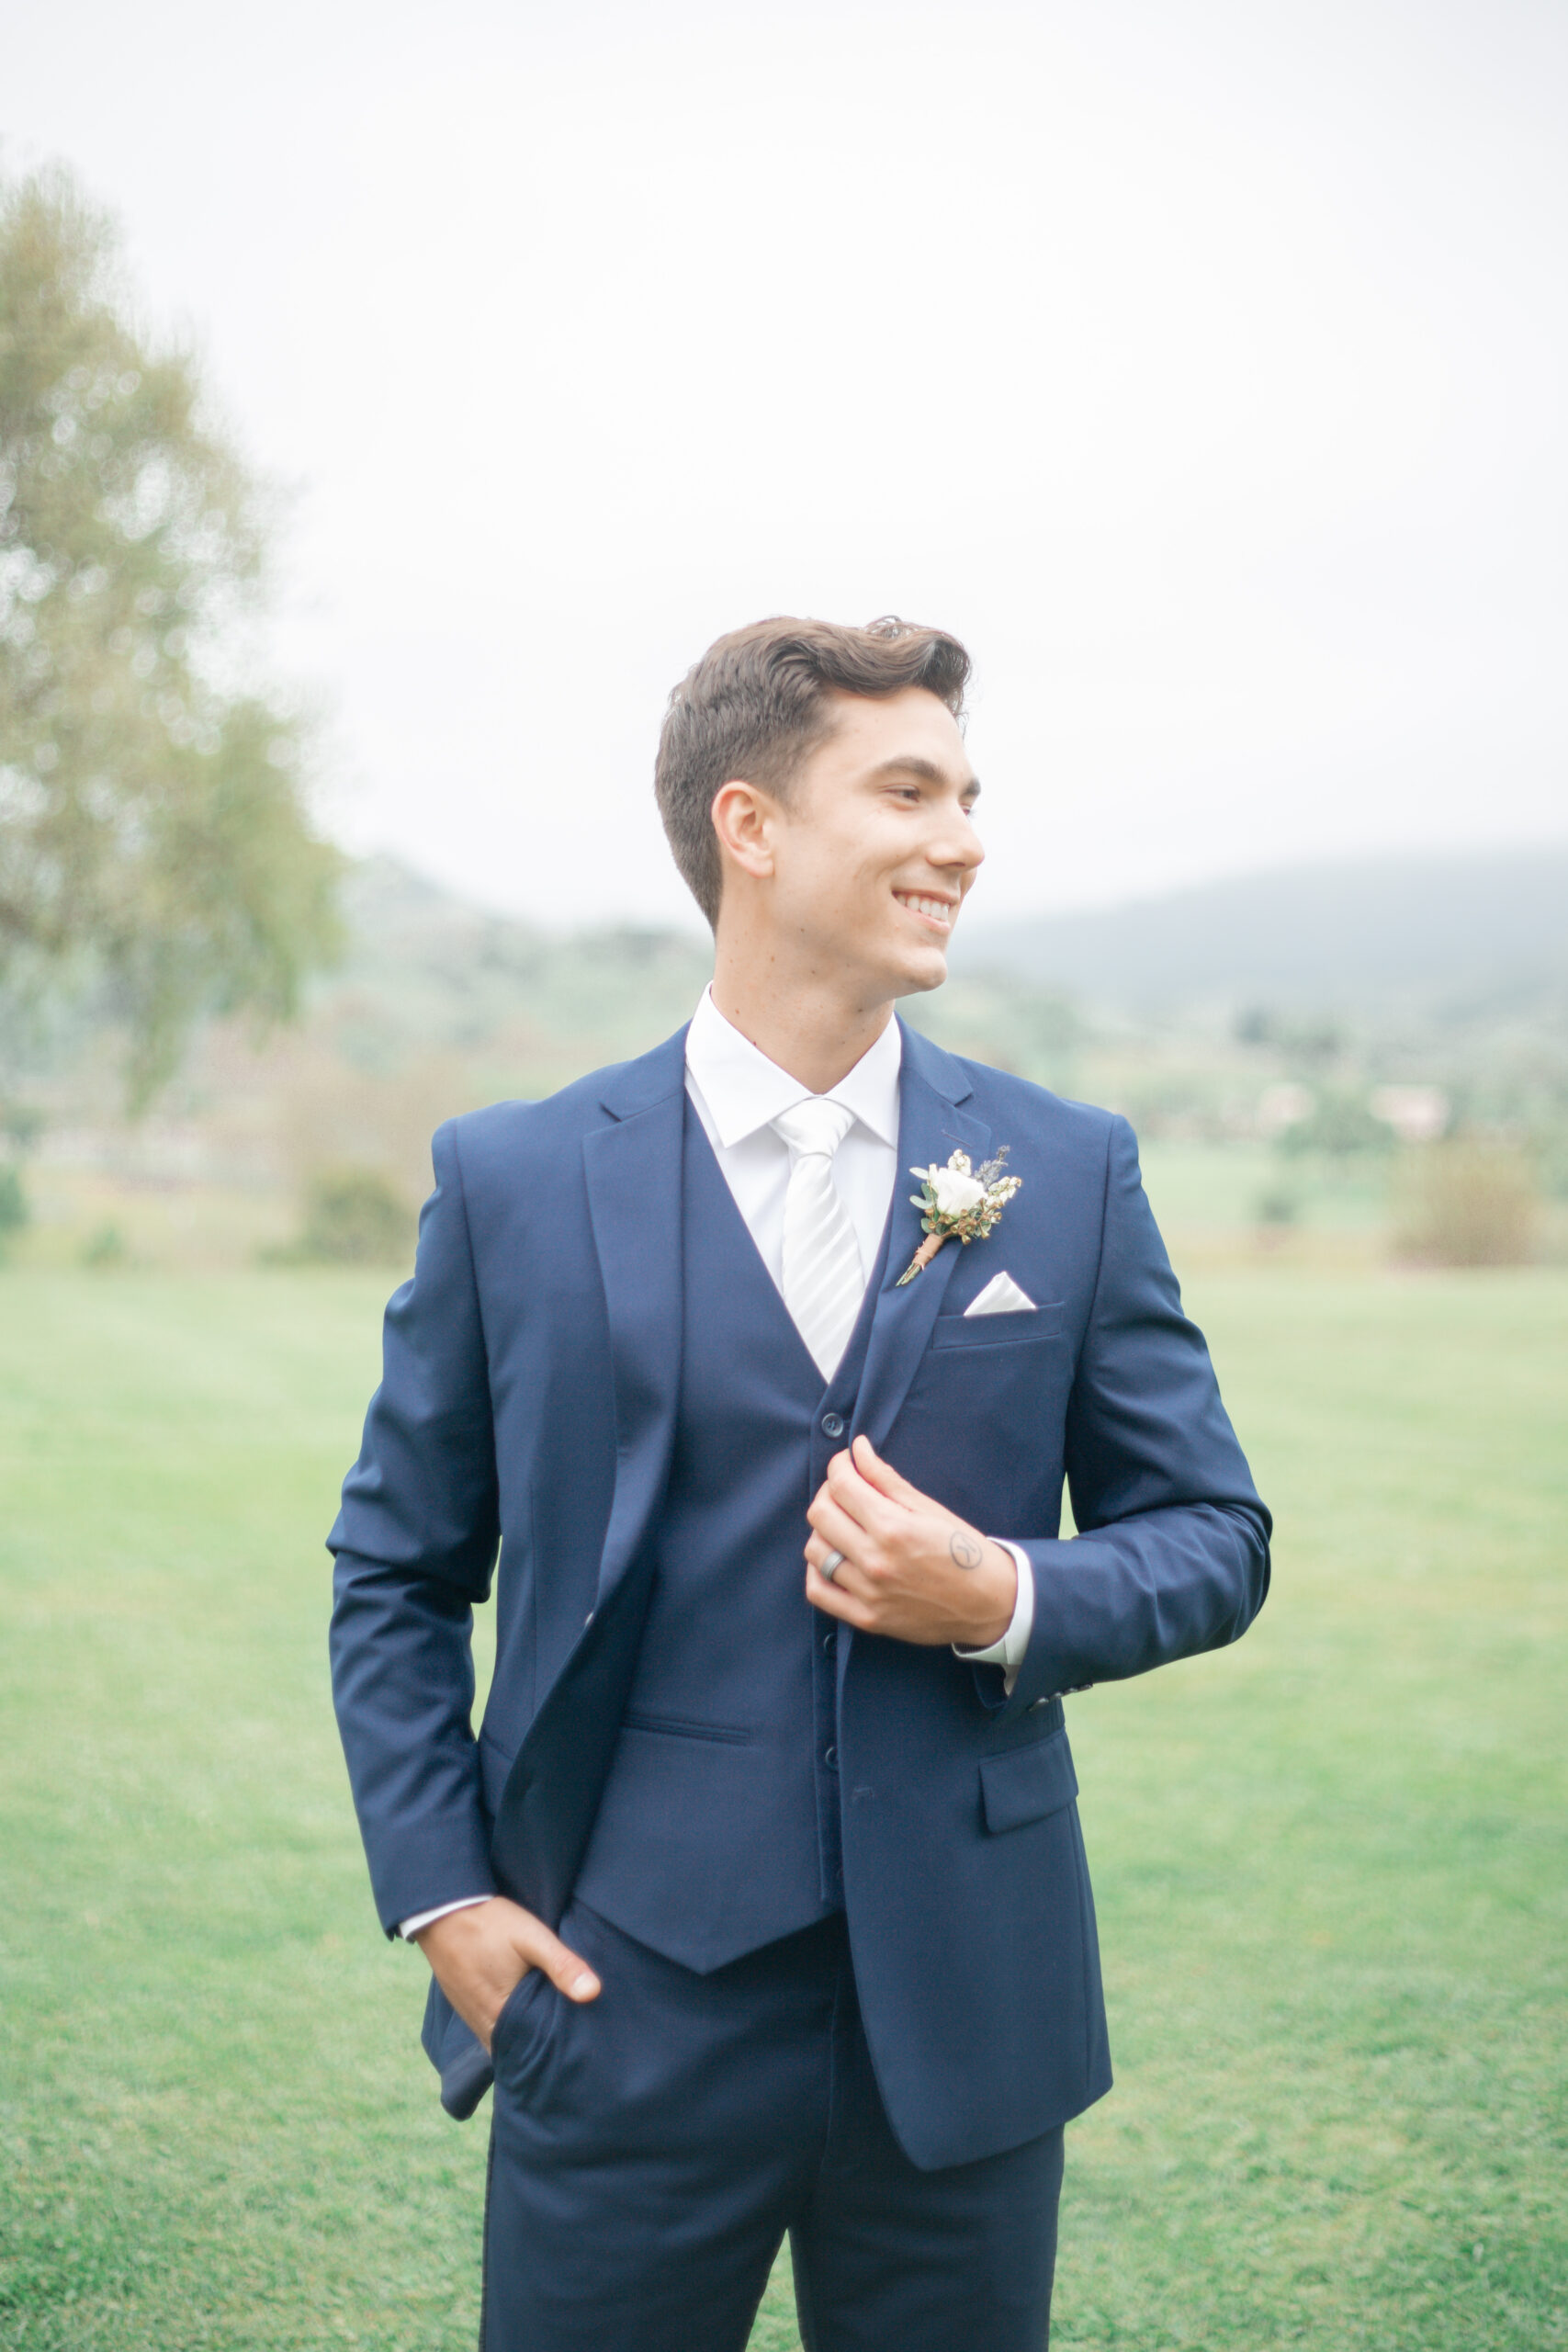 A groom wearing a three-piece midnight navy blue suit for his wedding day